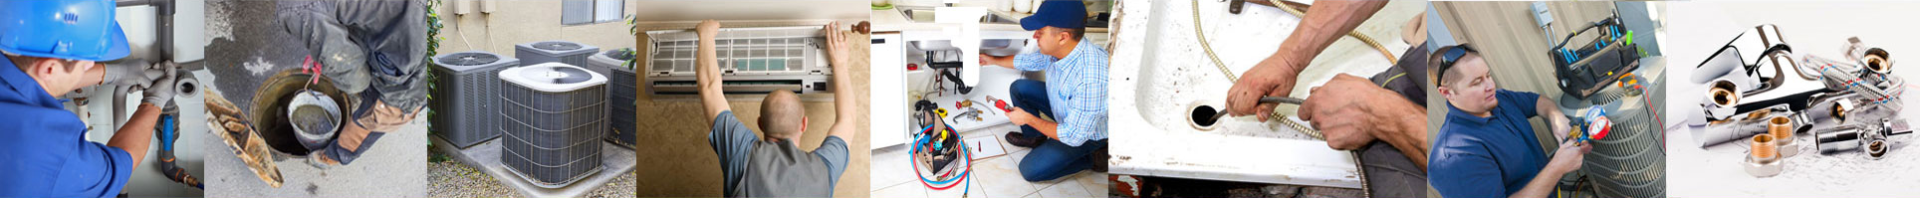 Plumbing, heating and drain cleaning services